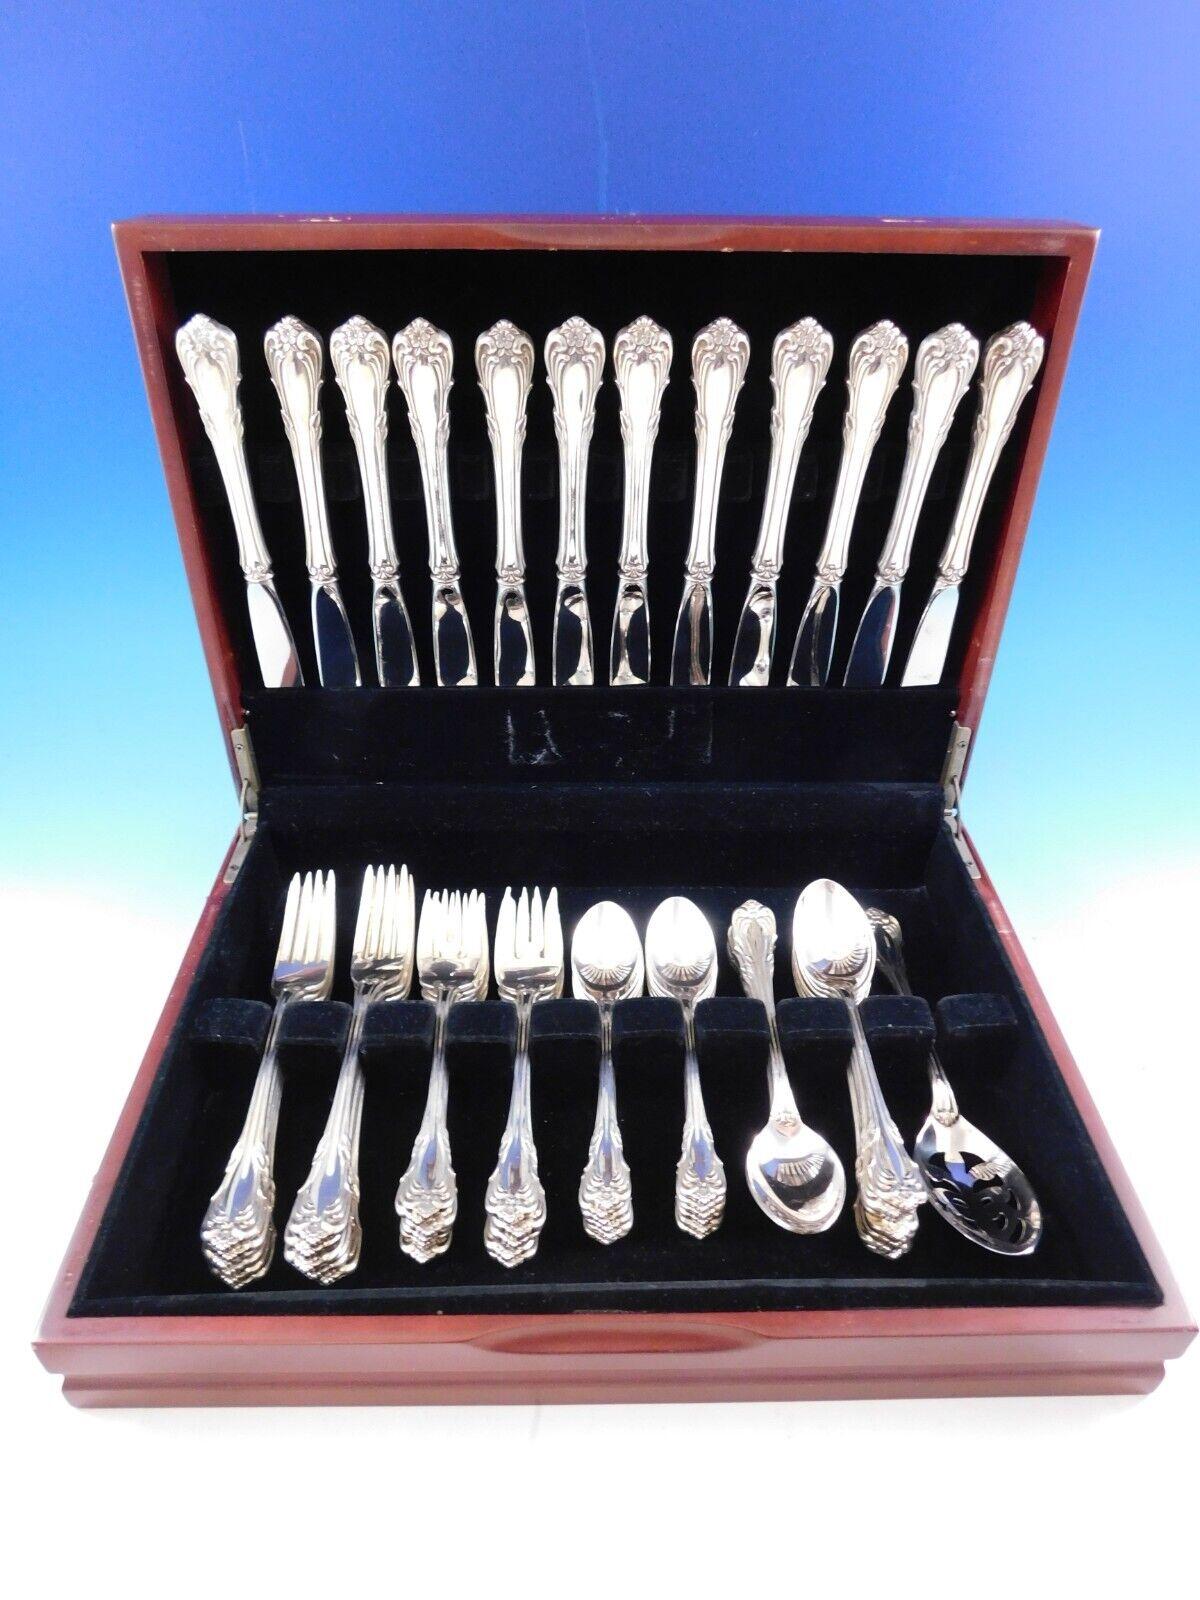 Veranda by Kirk Sterling Silver flatware set - 61 pieces. This set includes:

12 Knives, 9 1/8